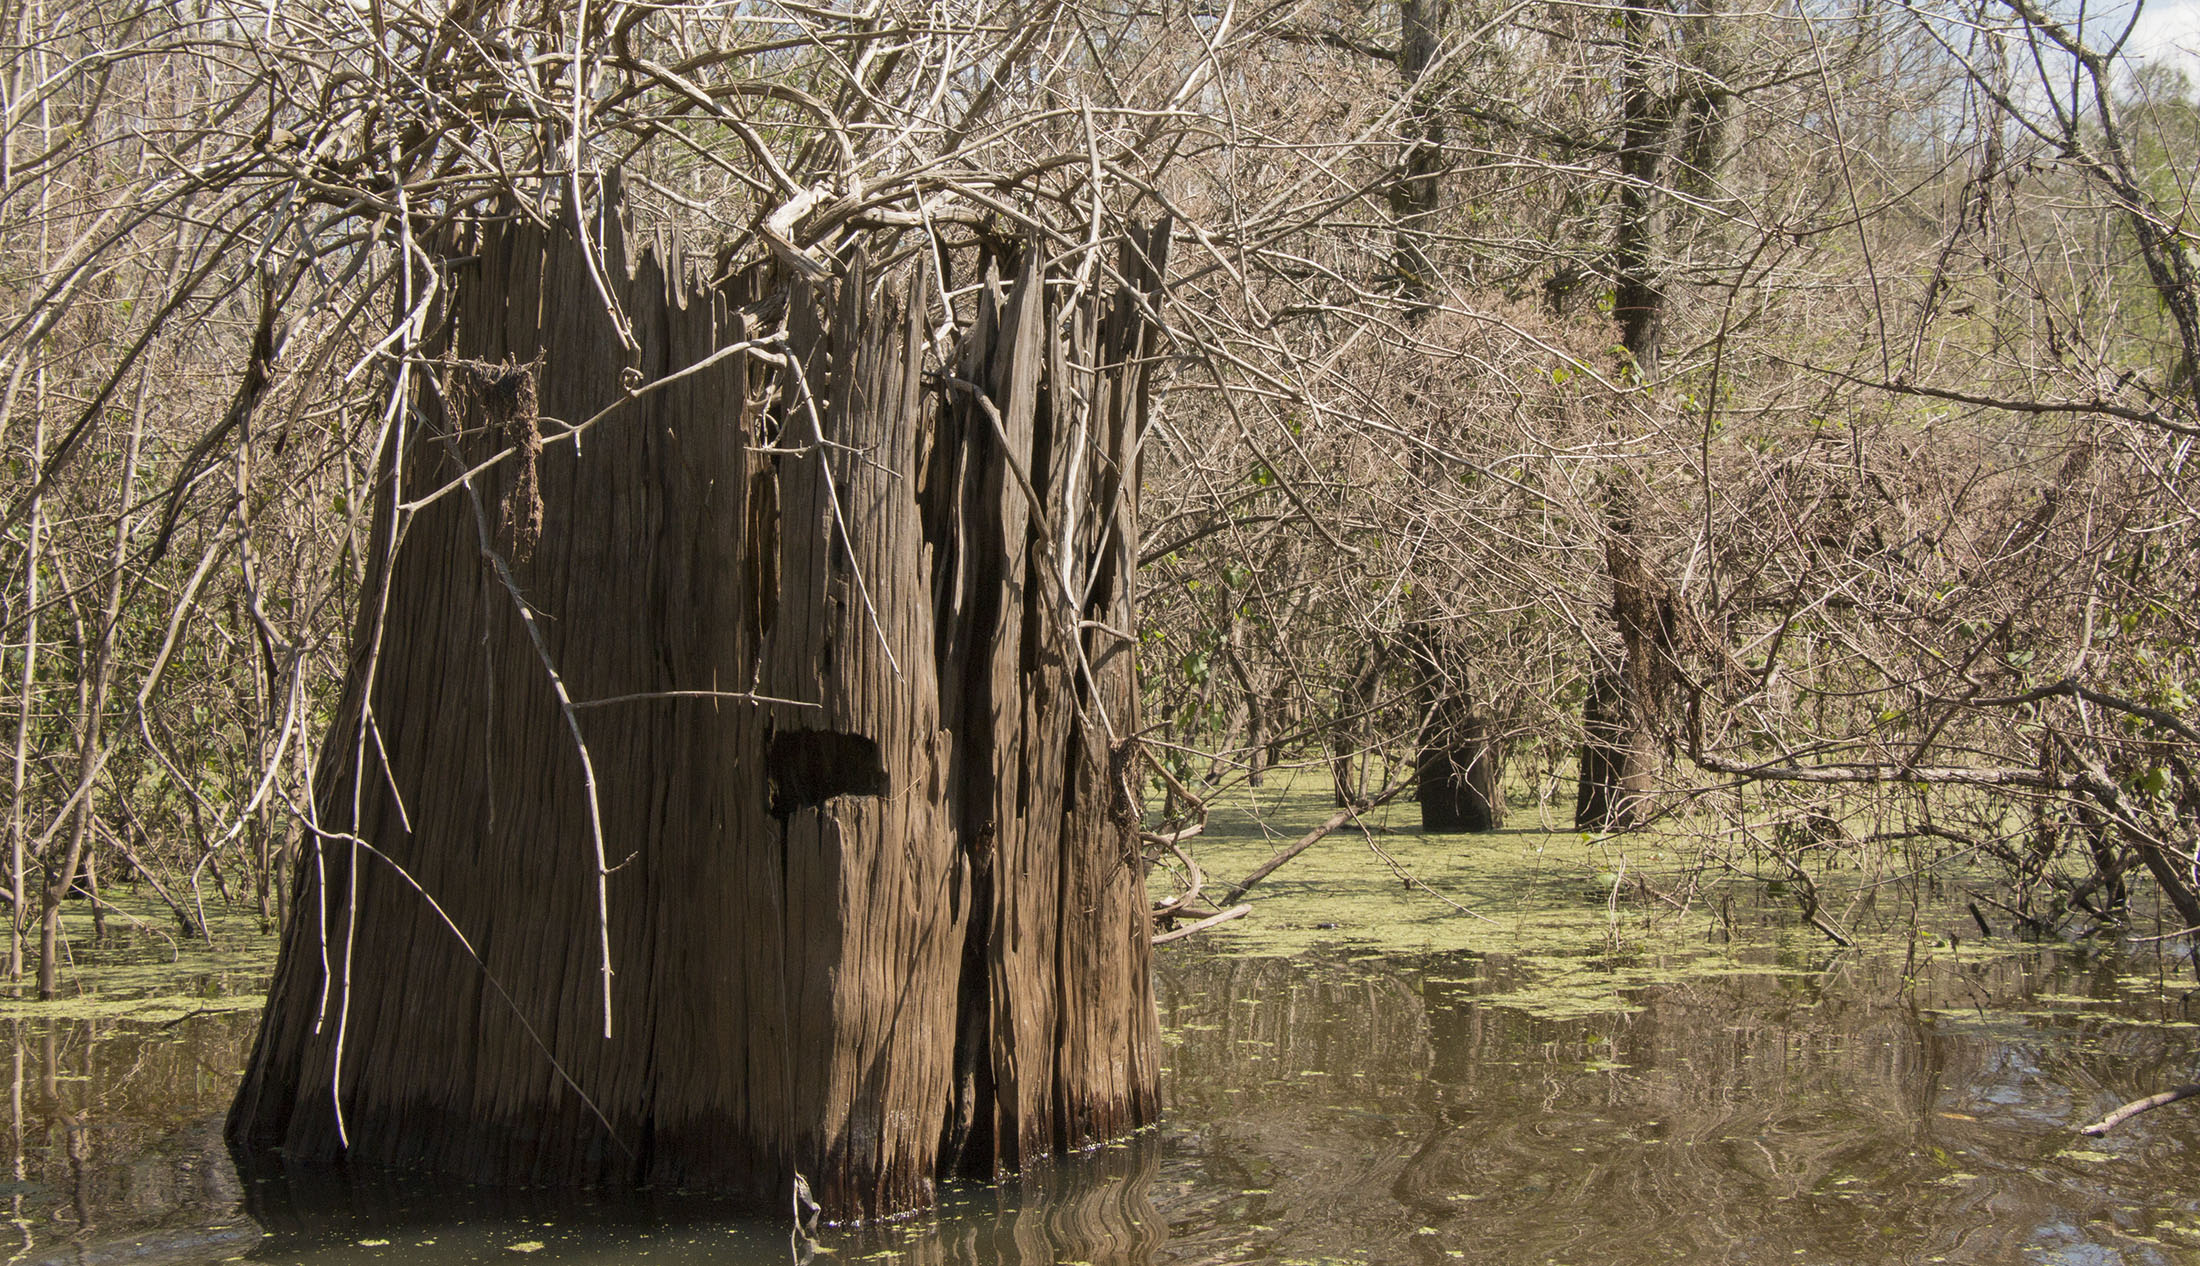 Stumps of cypress trees cut as far back as the 1800s still stand in the Atchafalaya. Almost every fully grown tree was cut from the basin, and it will take hundreds of years for them to grow back to their former prominence.